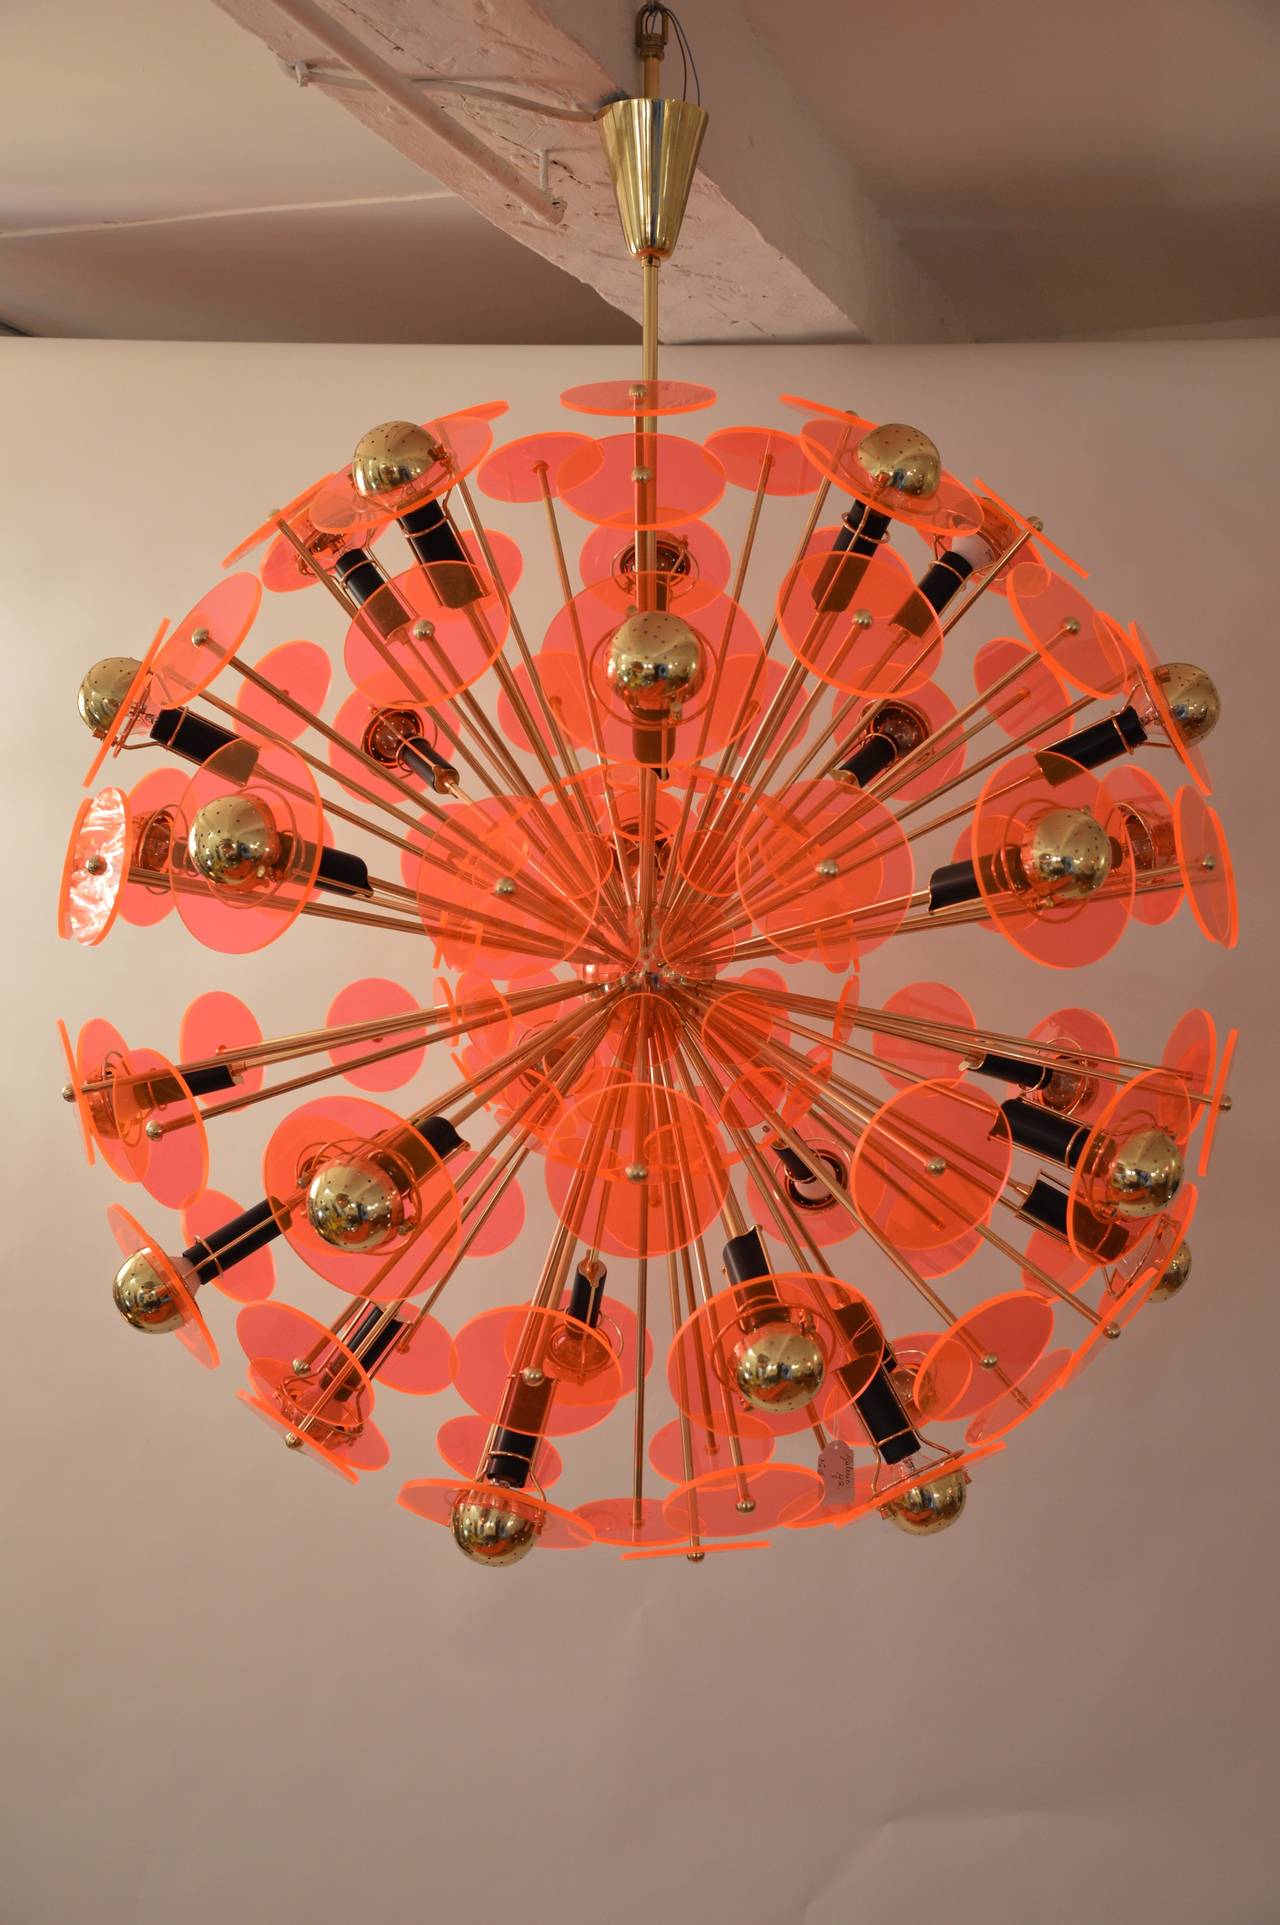 Important chandelier in gold varnished brass and orange plexiglass, designed by Fedele Papagni. 
Measures: 
Diameter  110cm.
Height: 140cm. 
Diameter of the big plexiglass disc: 15cm.
Diameter of the little plexiglass disc  13cm.